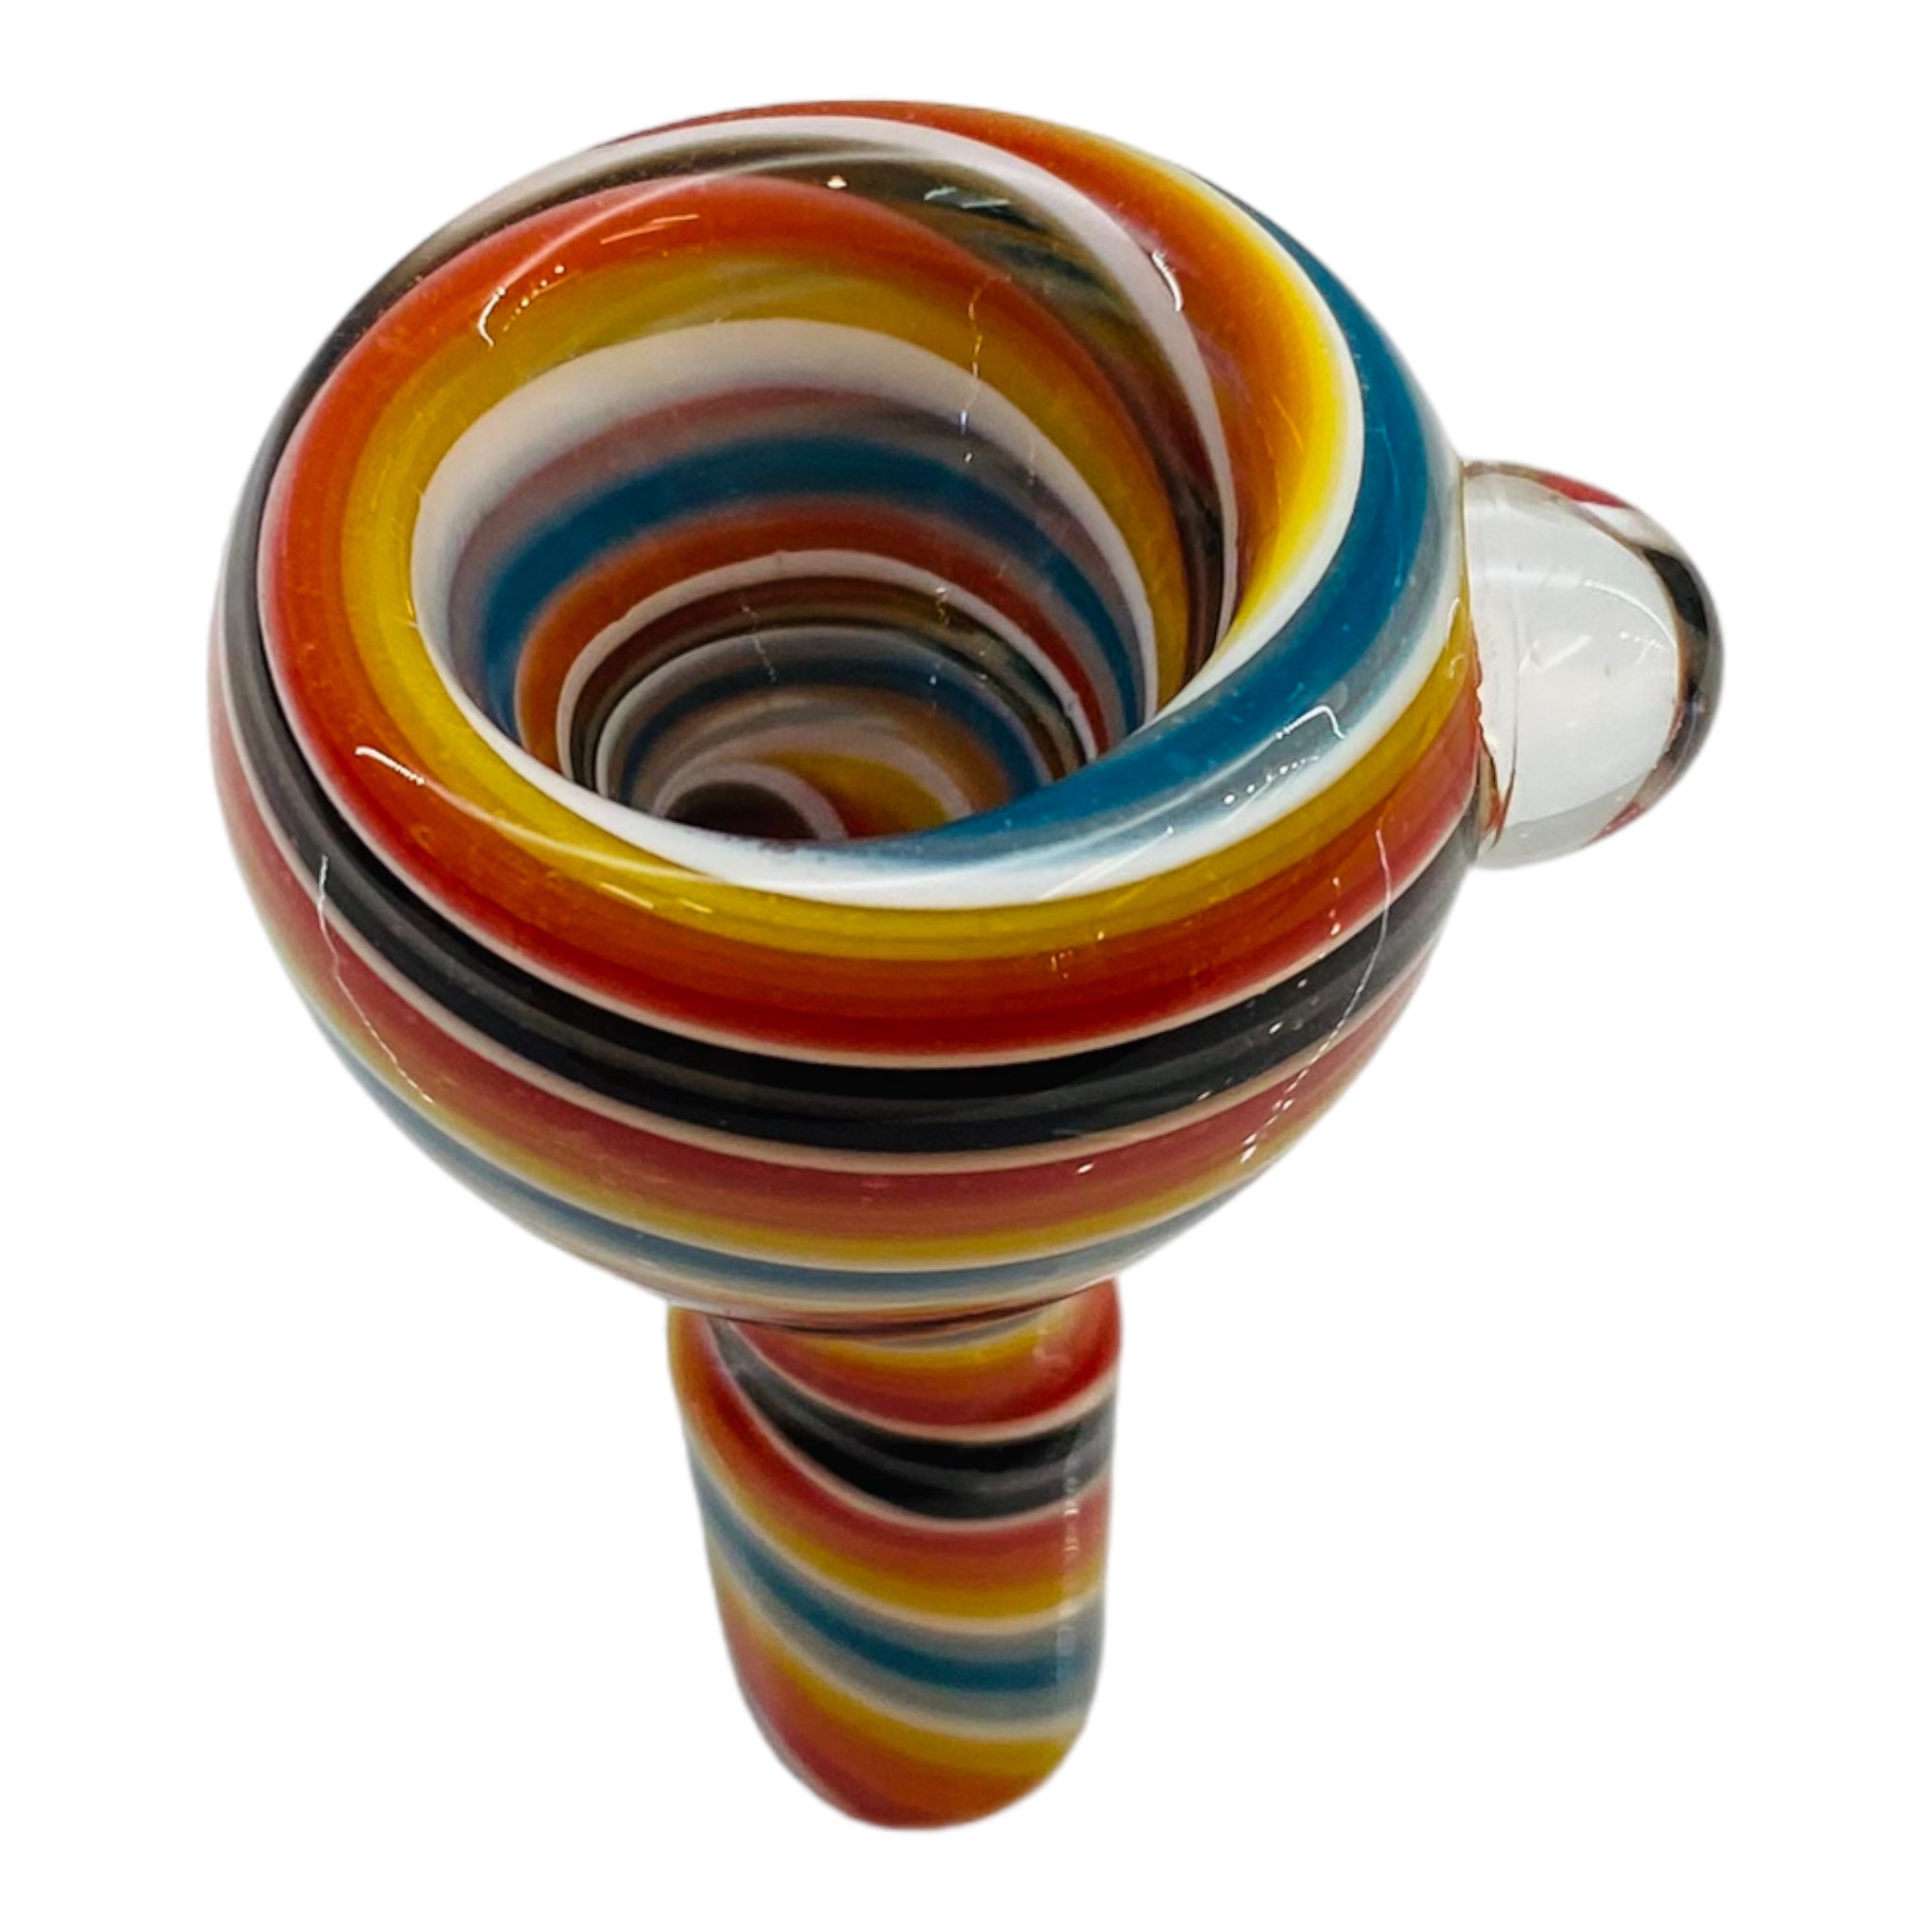 14mm glass bong bowl slide with fire and ice theme rainbow fade